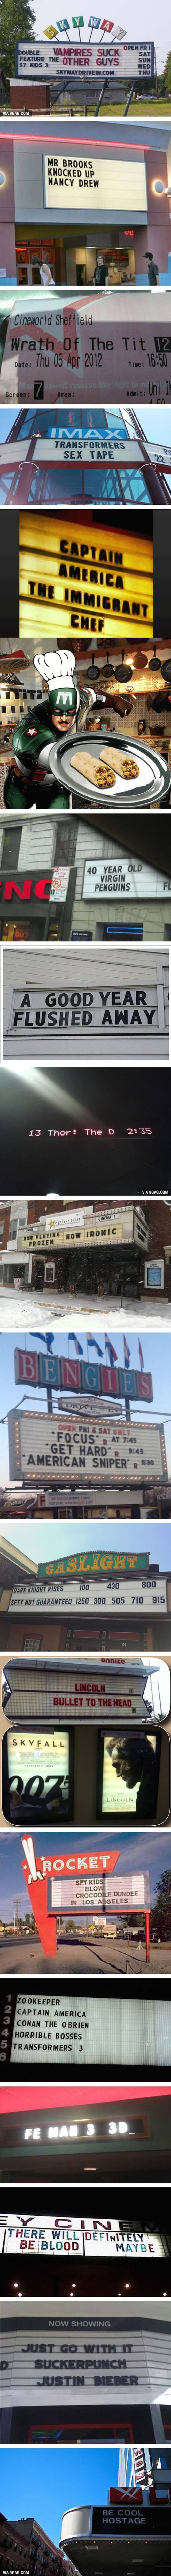 15 Hilarious Movie Theater Coincidences 